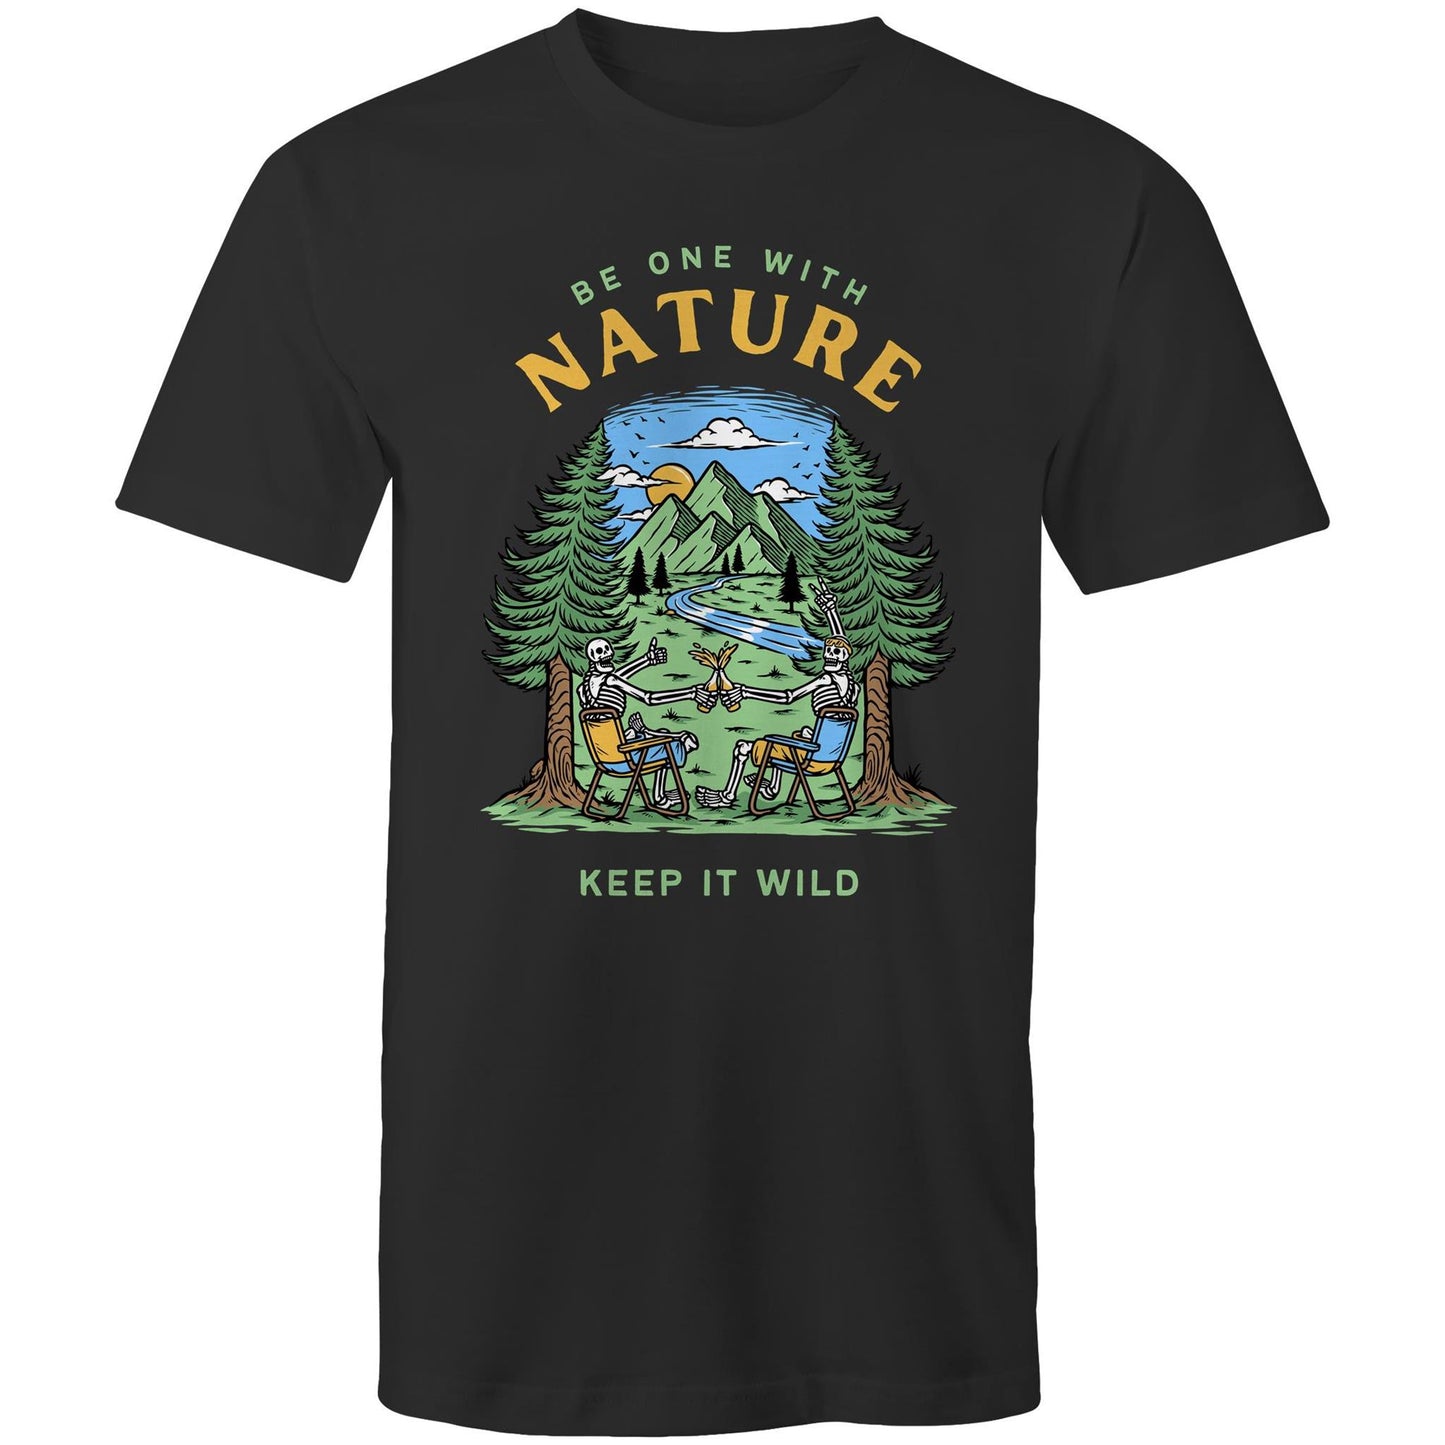 Be One With Nature, Skeleton - Mens T-Shirt Black Mens T-shirt Environment Summer